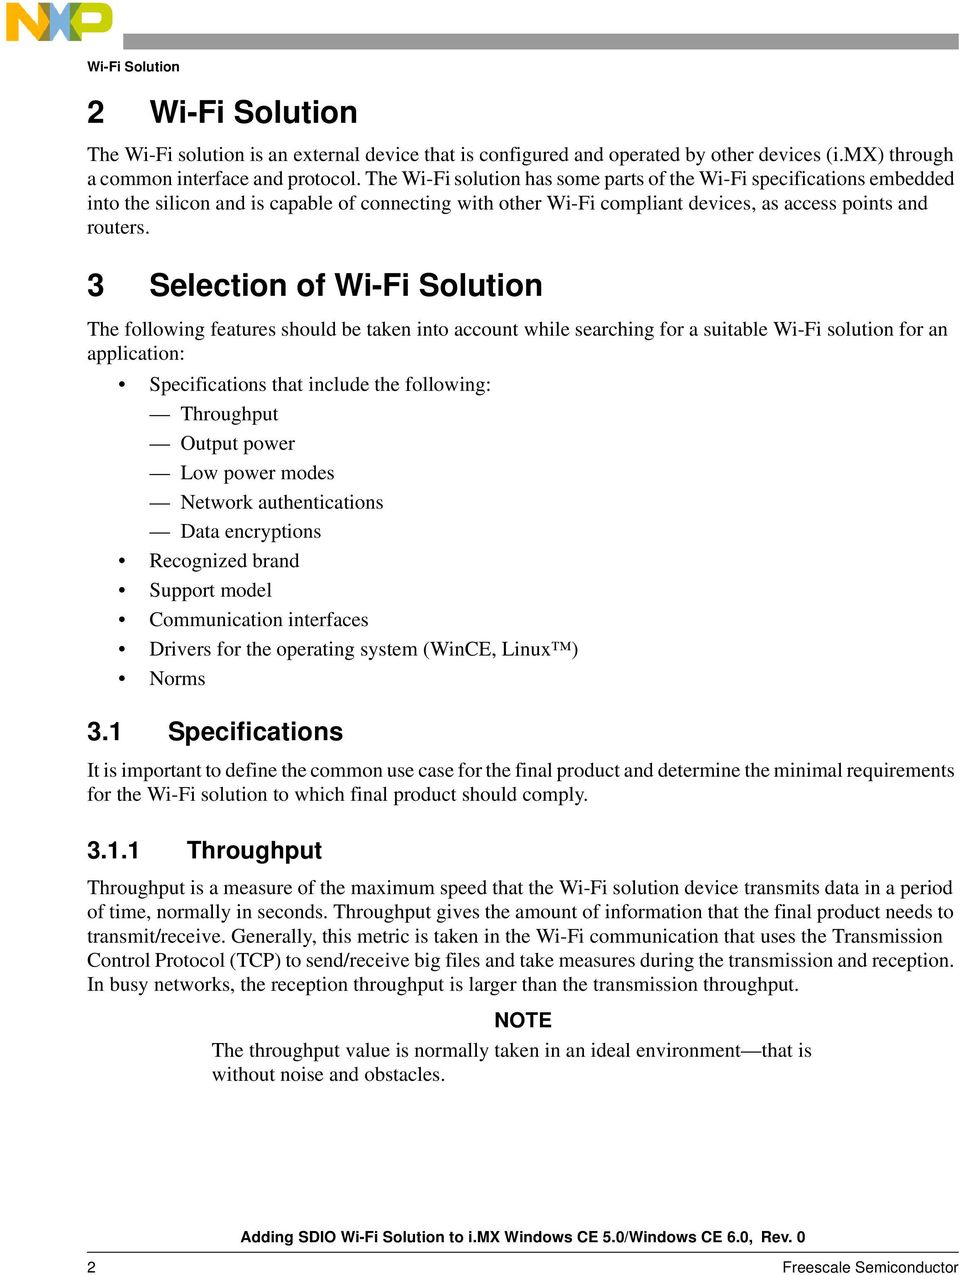 3 Selection of Wi-Fi Solution The following features should be taken into account while searching for a suitable Wi-Fi solution for an application: Specifications that include the following: